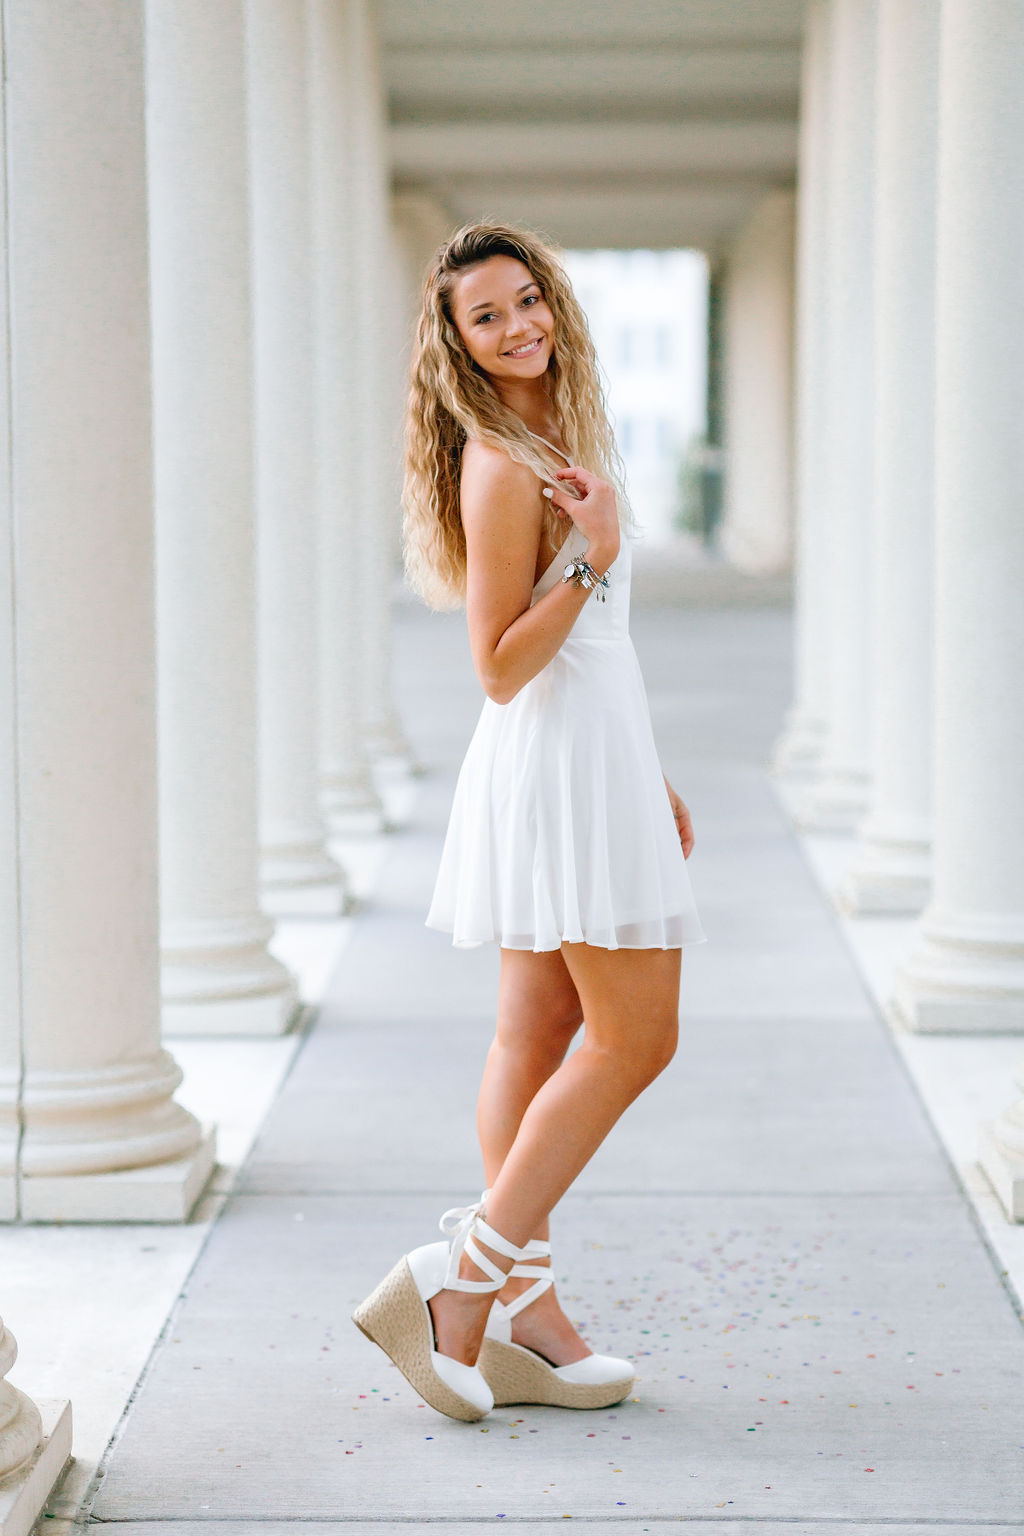 A college grad stands in a white dress playing with her hair thanks to jmu tutoring